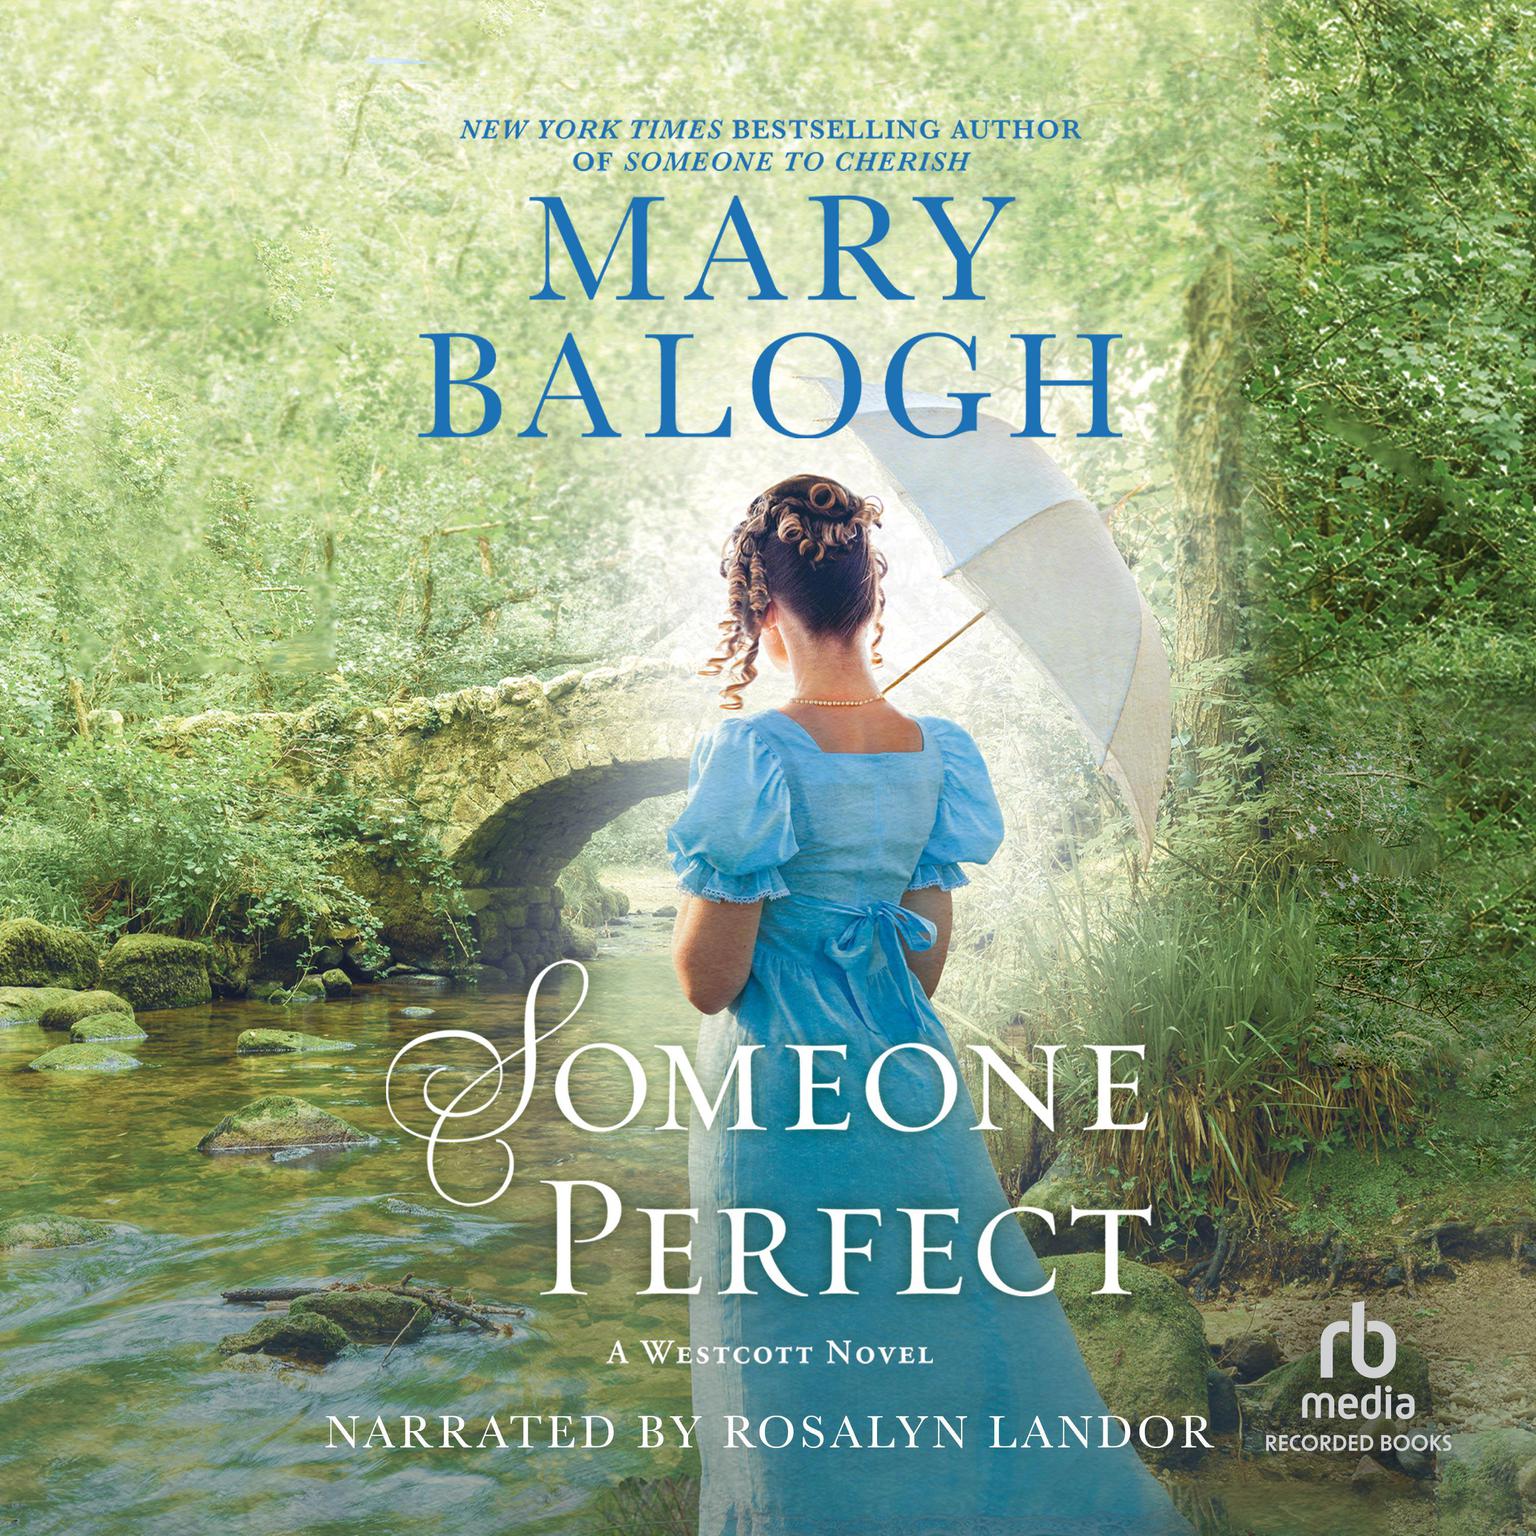 Someone Perfect Audiobook, by Mary Balogh